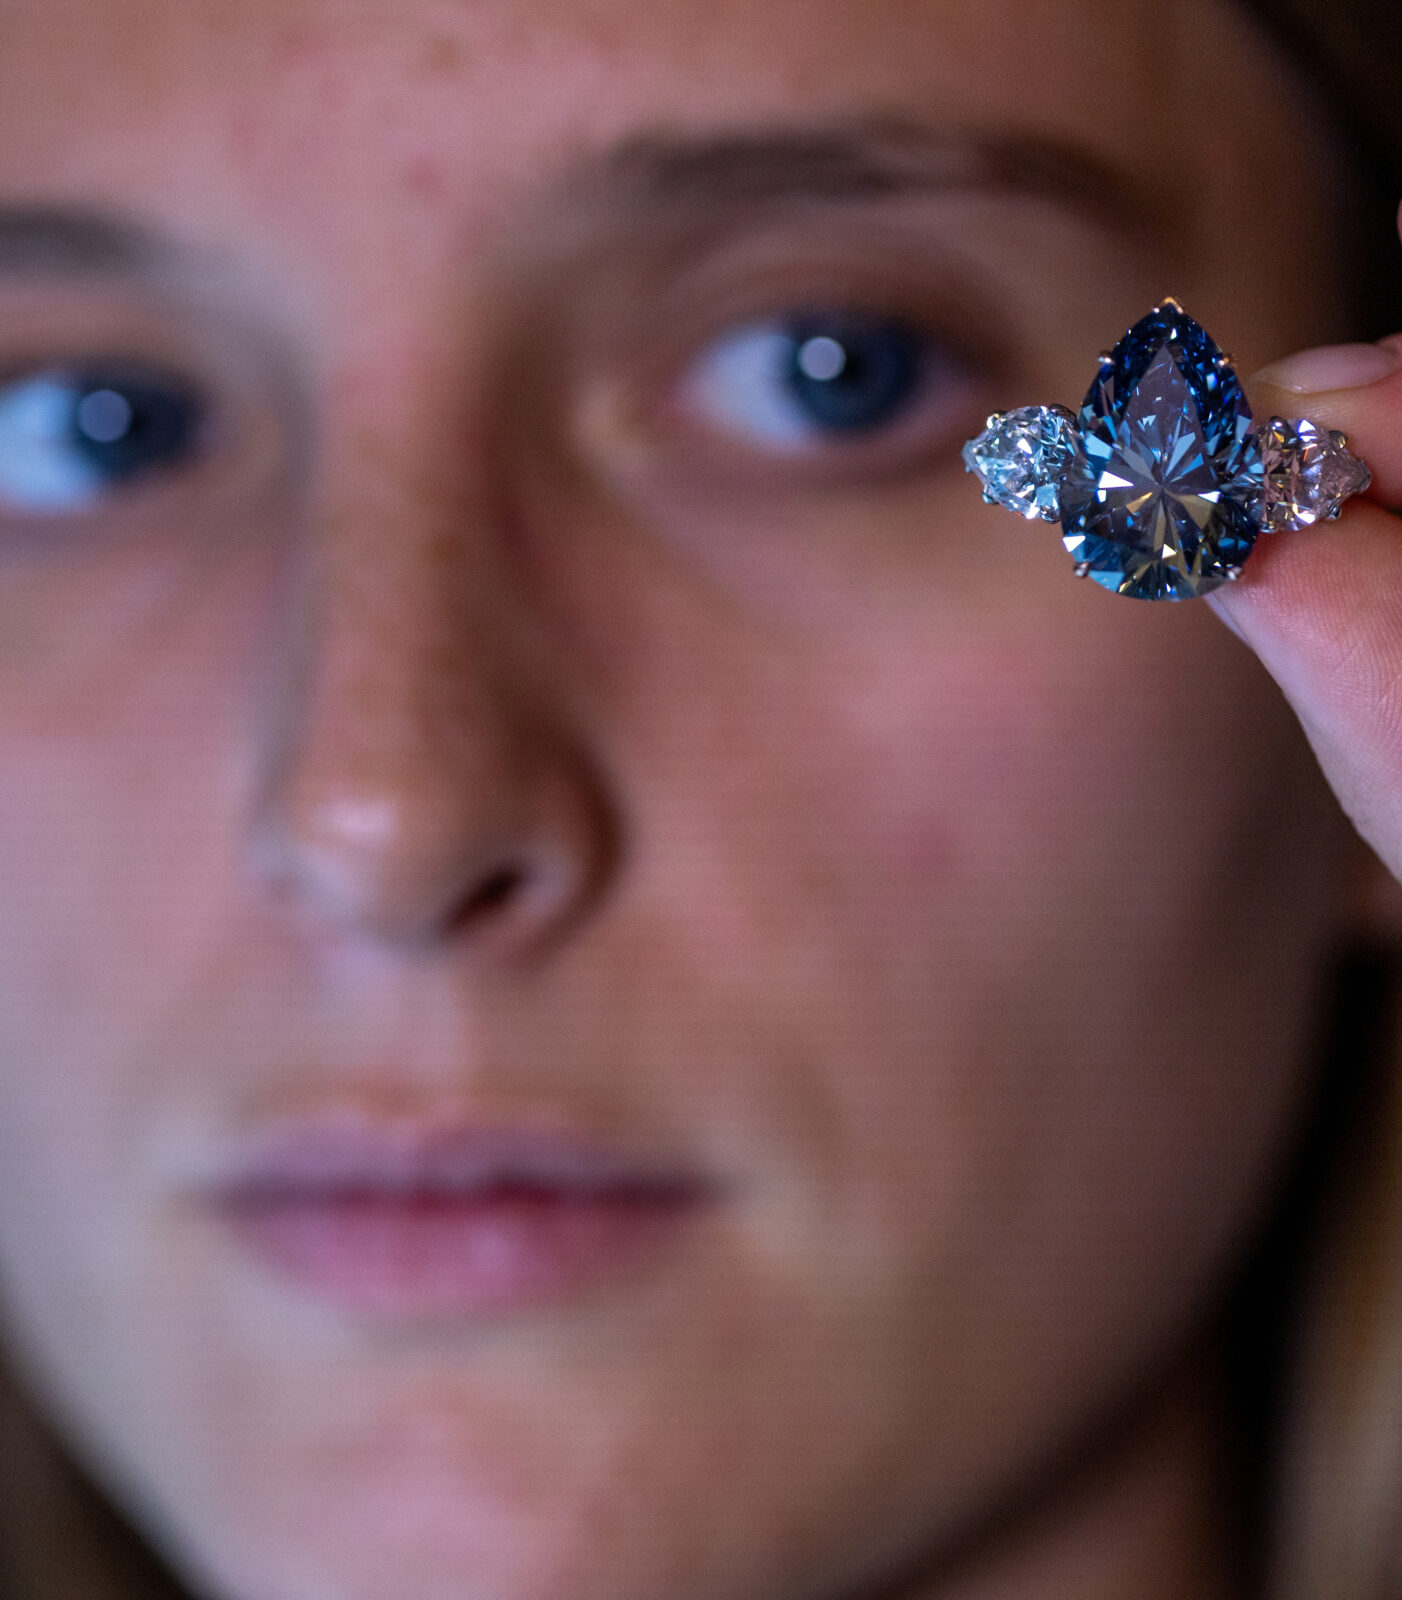 Chiadini holds the “Bleu Royal” diamond during an auction preview at Christie’s in Geneva